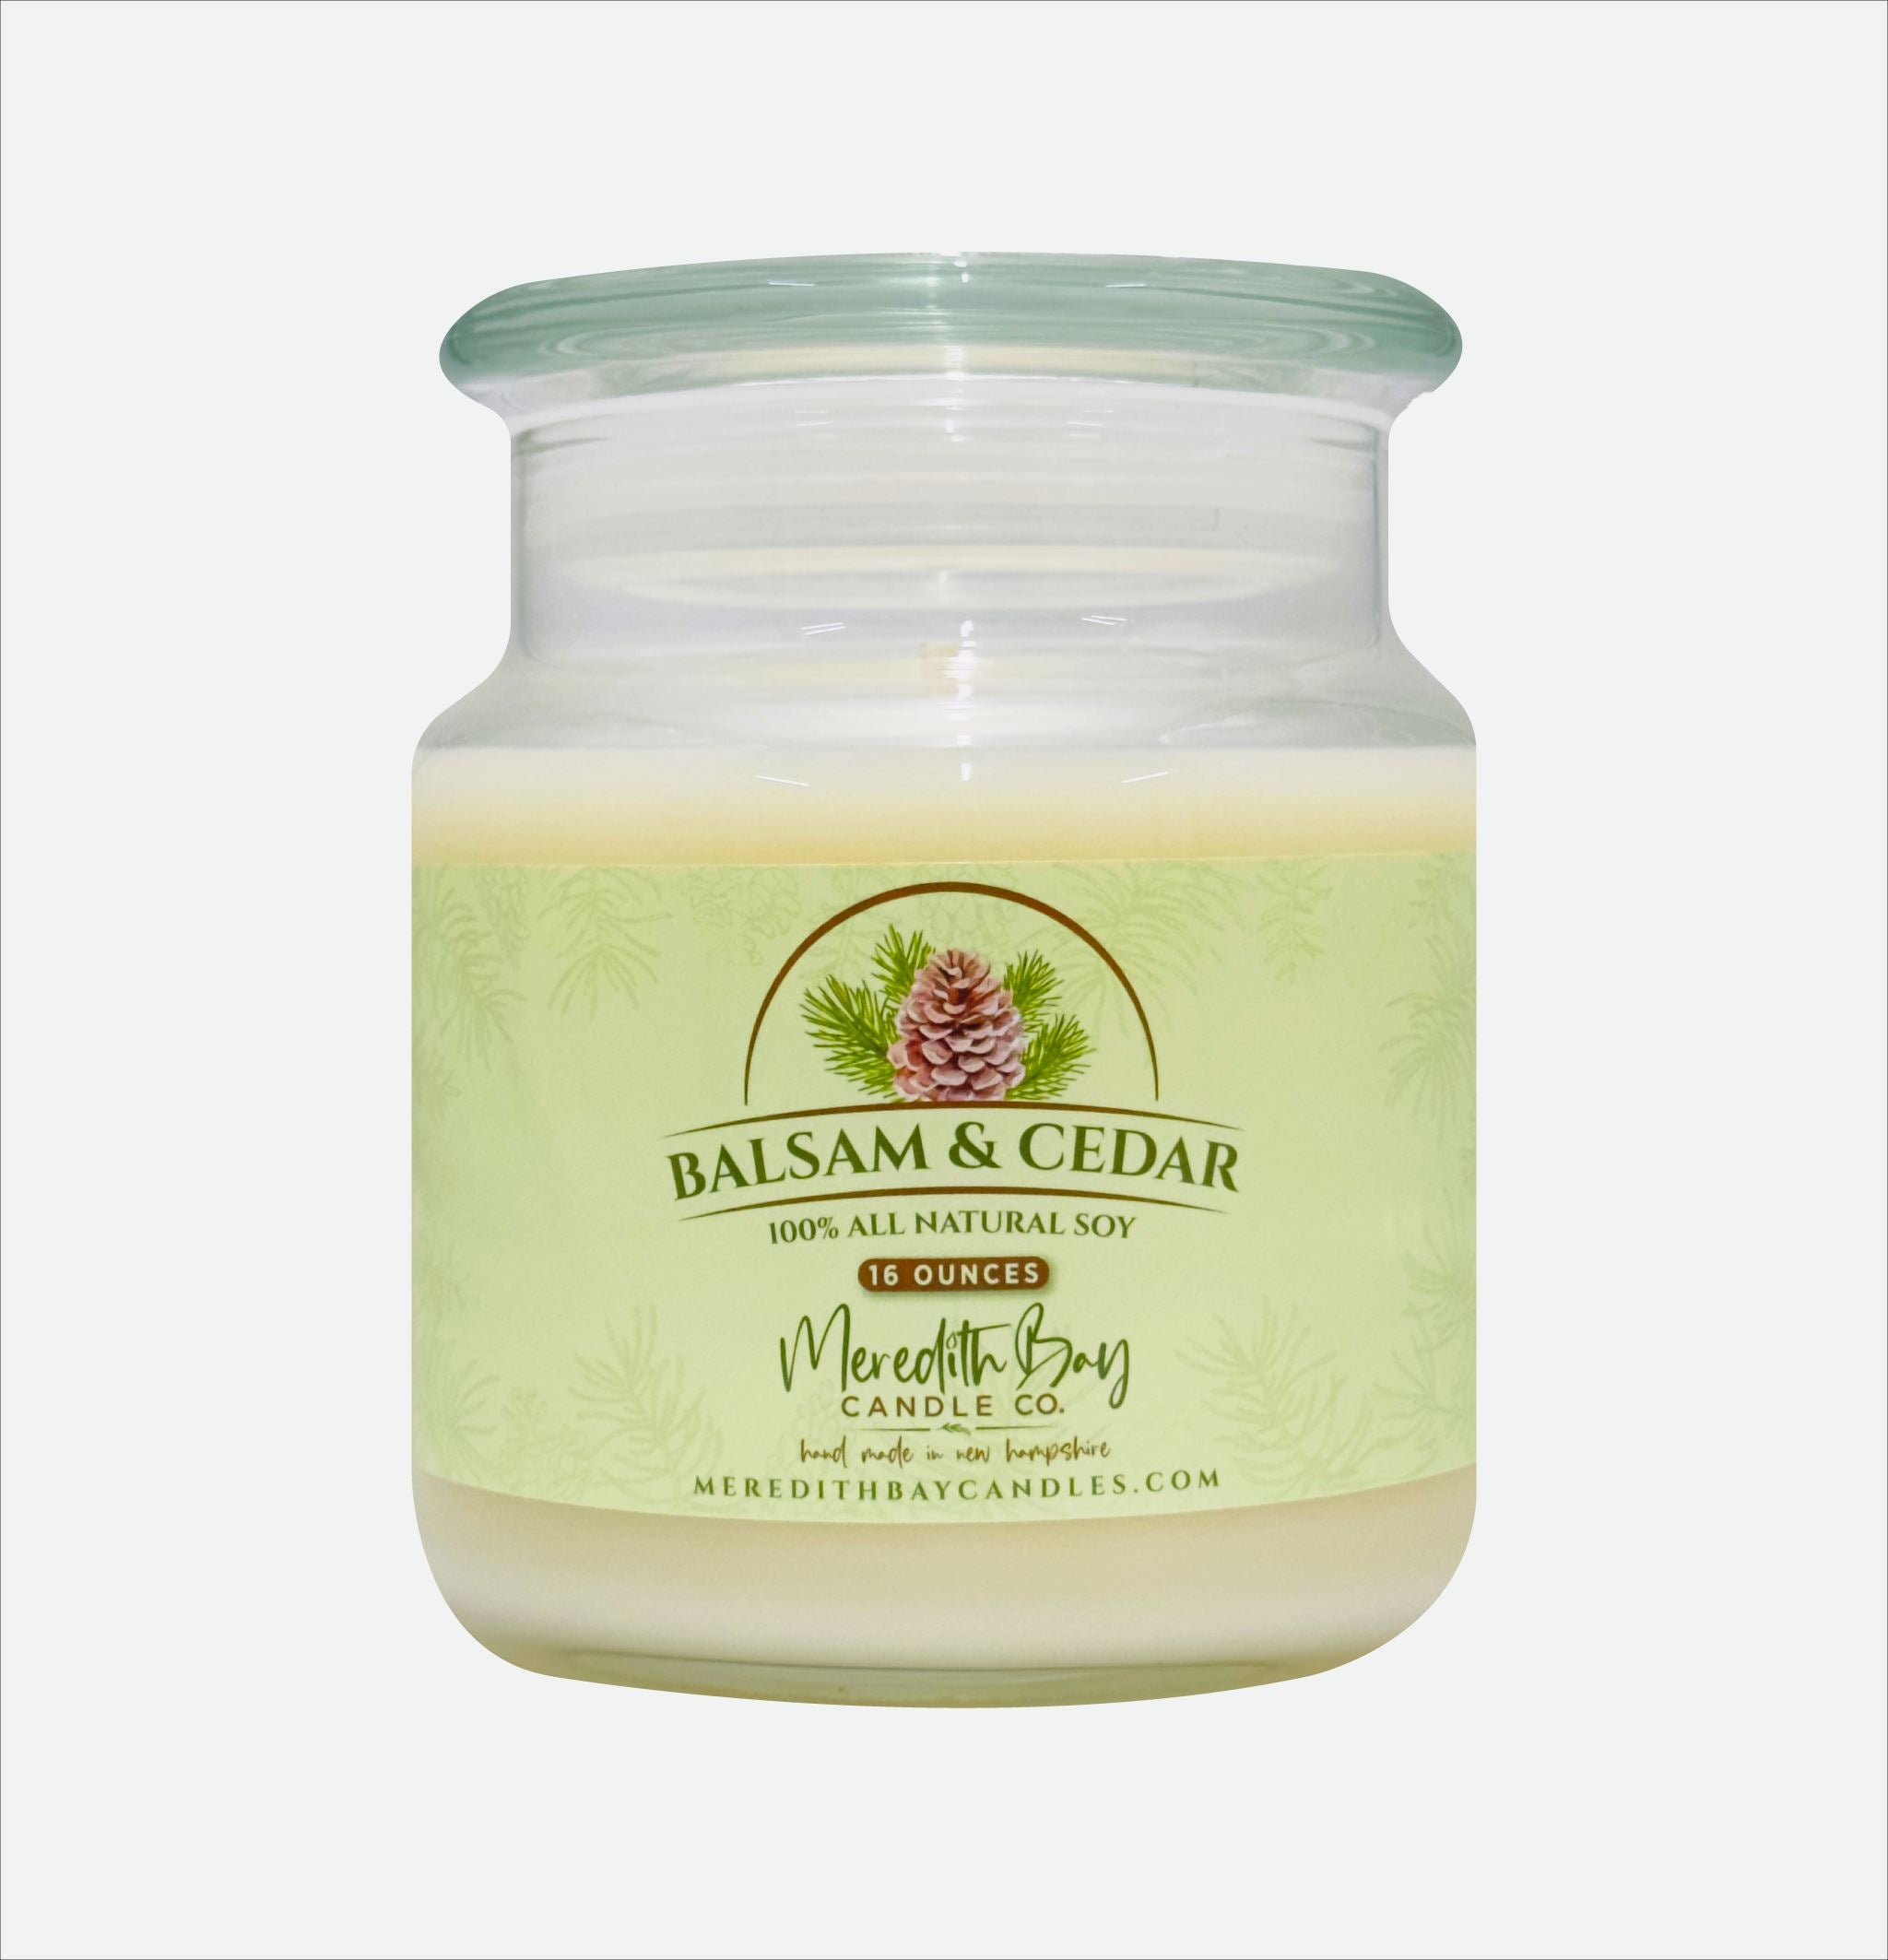 Balsam & Cedar Soy Candle Soy Candle Meredith Bay Candle Co 16.0 Oz 